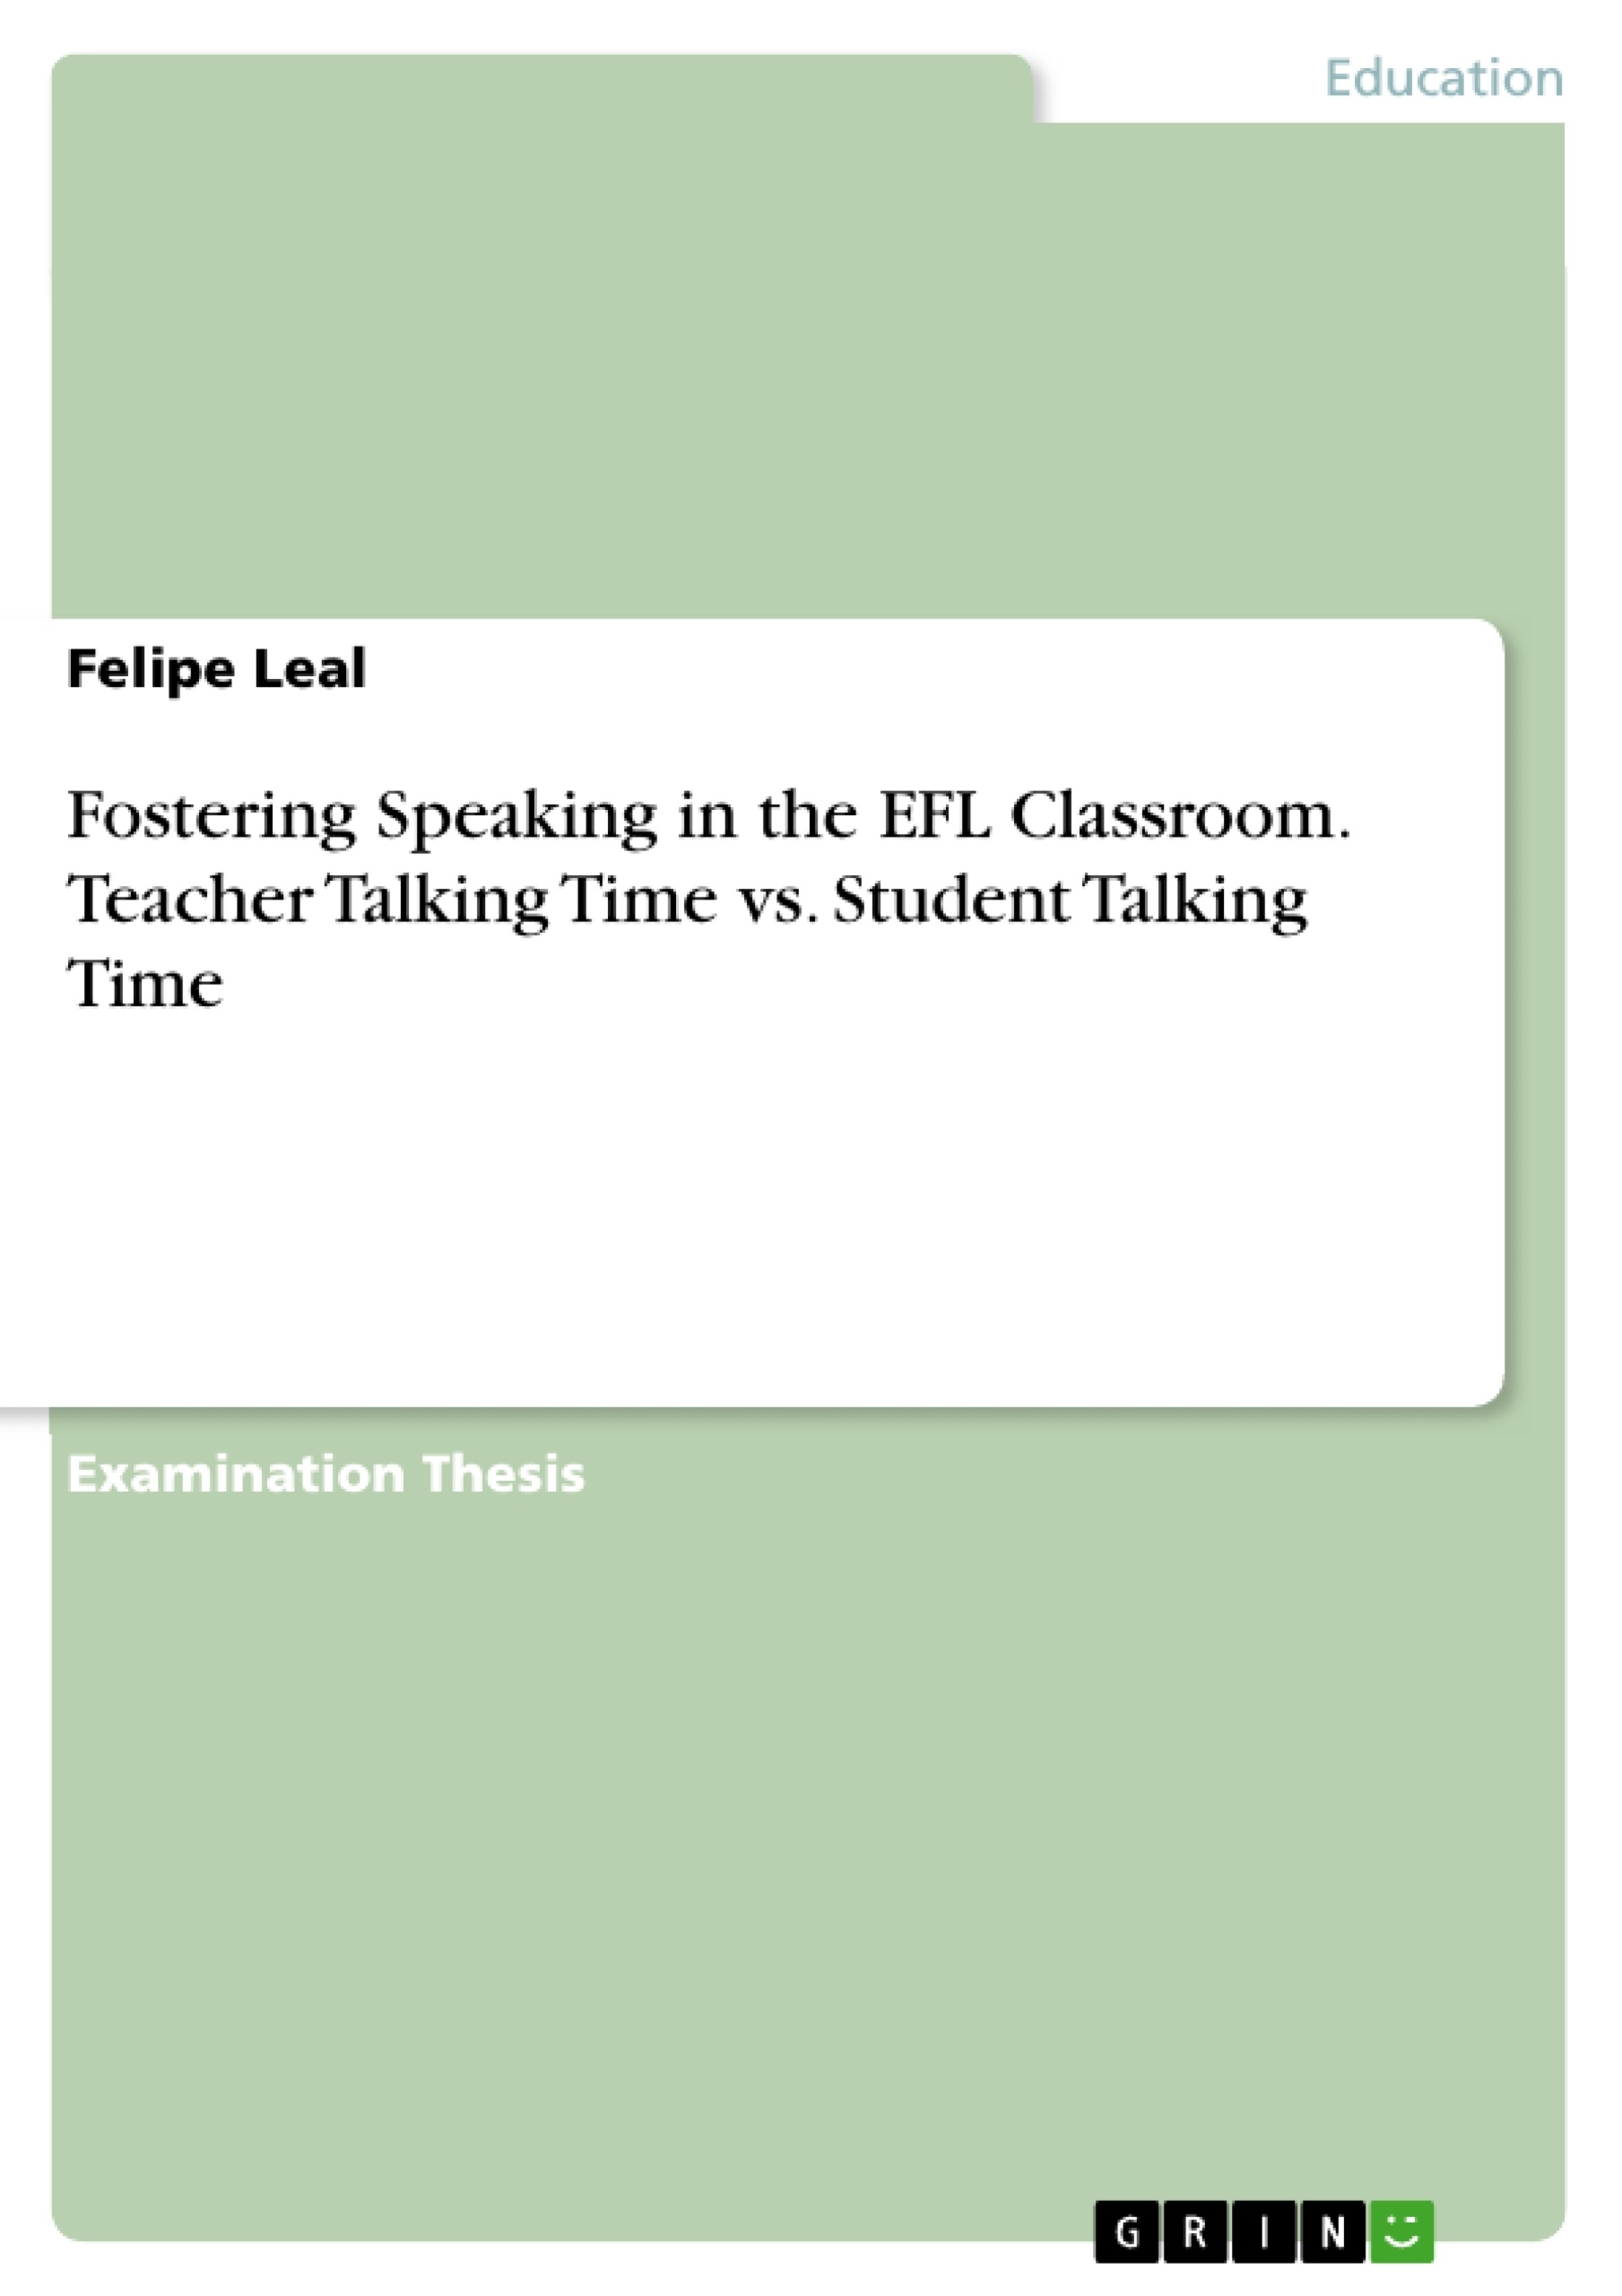 Título: Fostering Speaking in the EFL Classroom. Teacher Talking Time vs. Student Talking Time